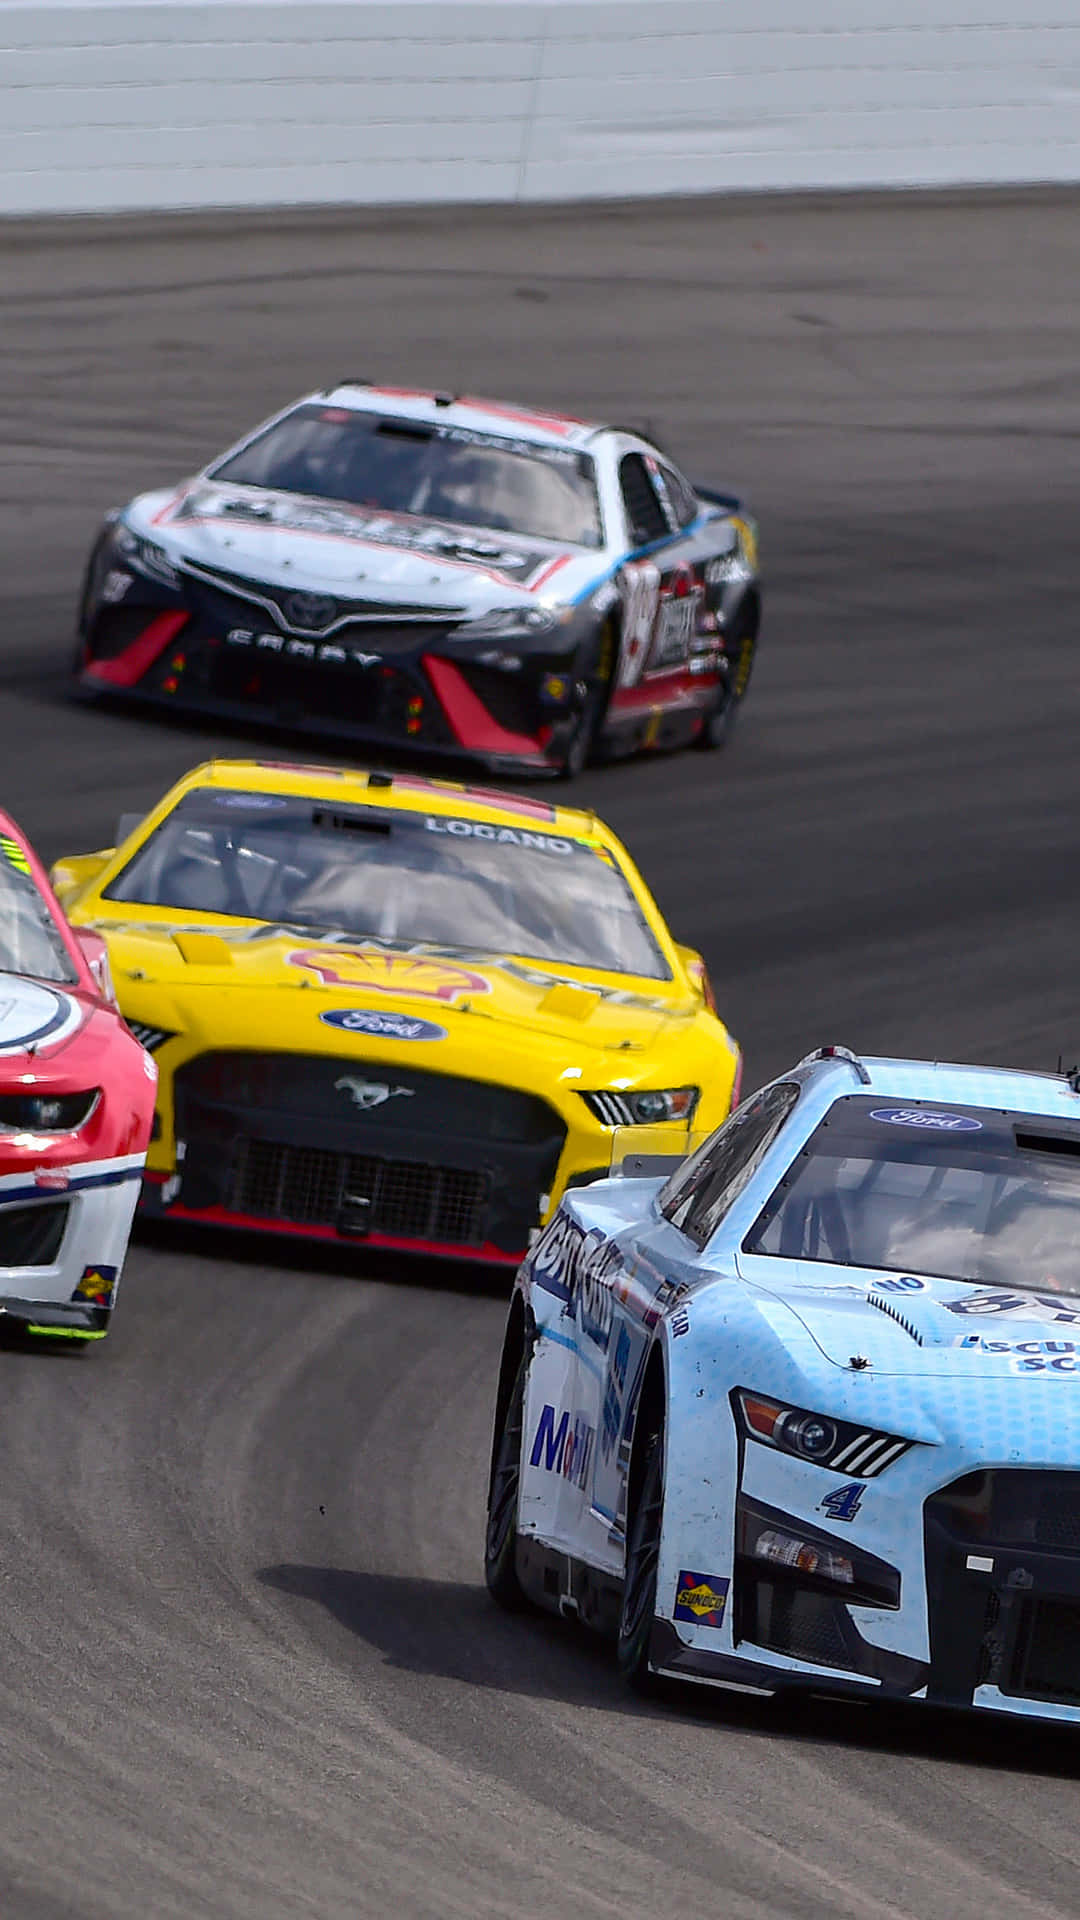 Keep up with the action with Nascar iPhone Wallpaper